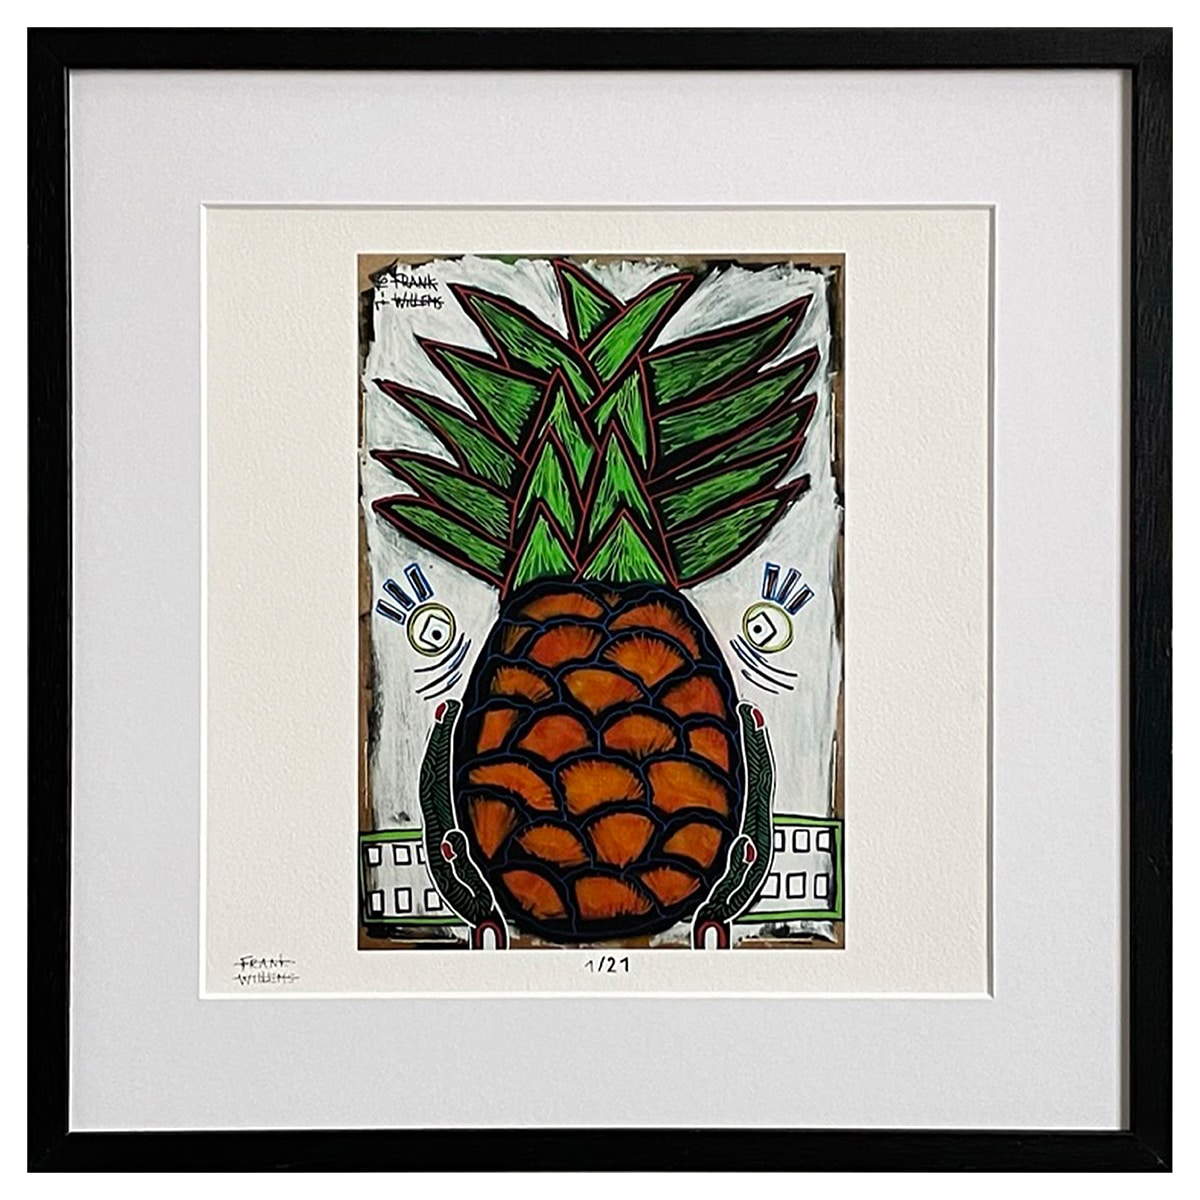 Limited Edt Art Prints - YUMMY PINEAPPLE - Frank Willems